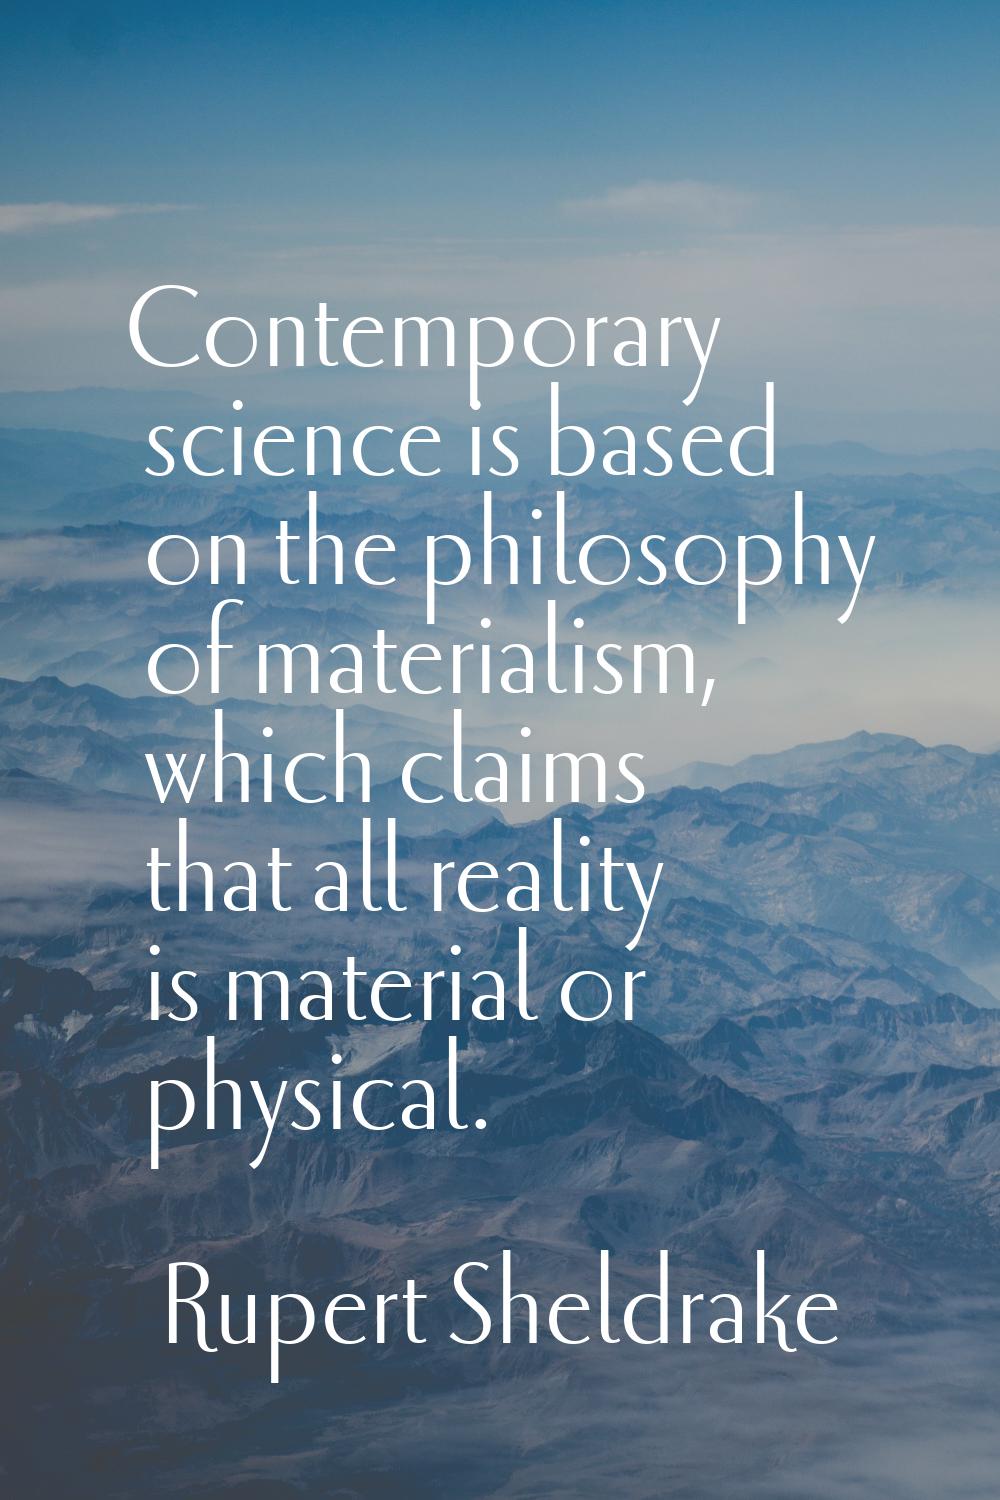 Contemporary science is based on the philosophy of materialism, which claims that all reality is ma